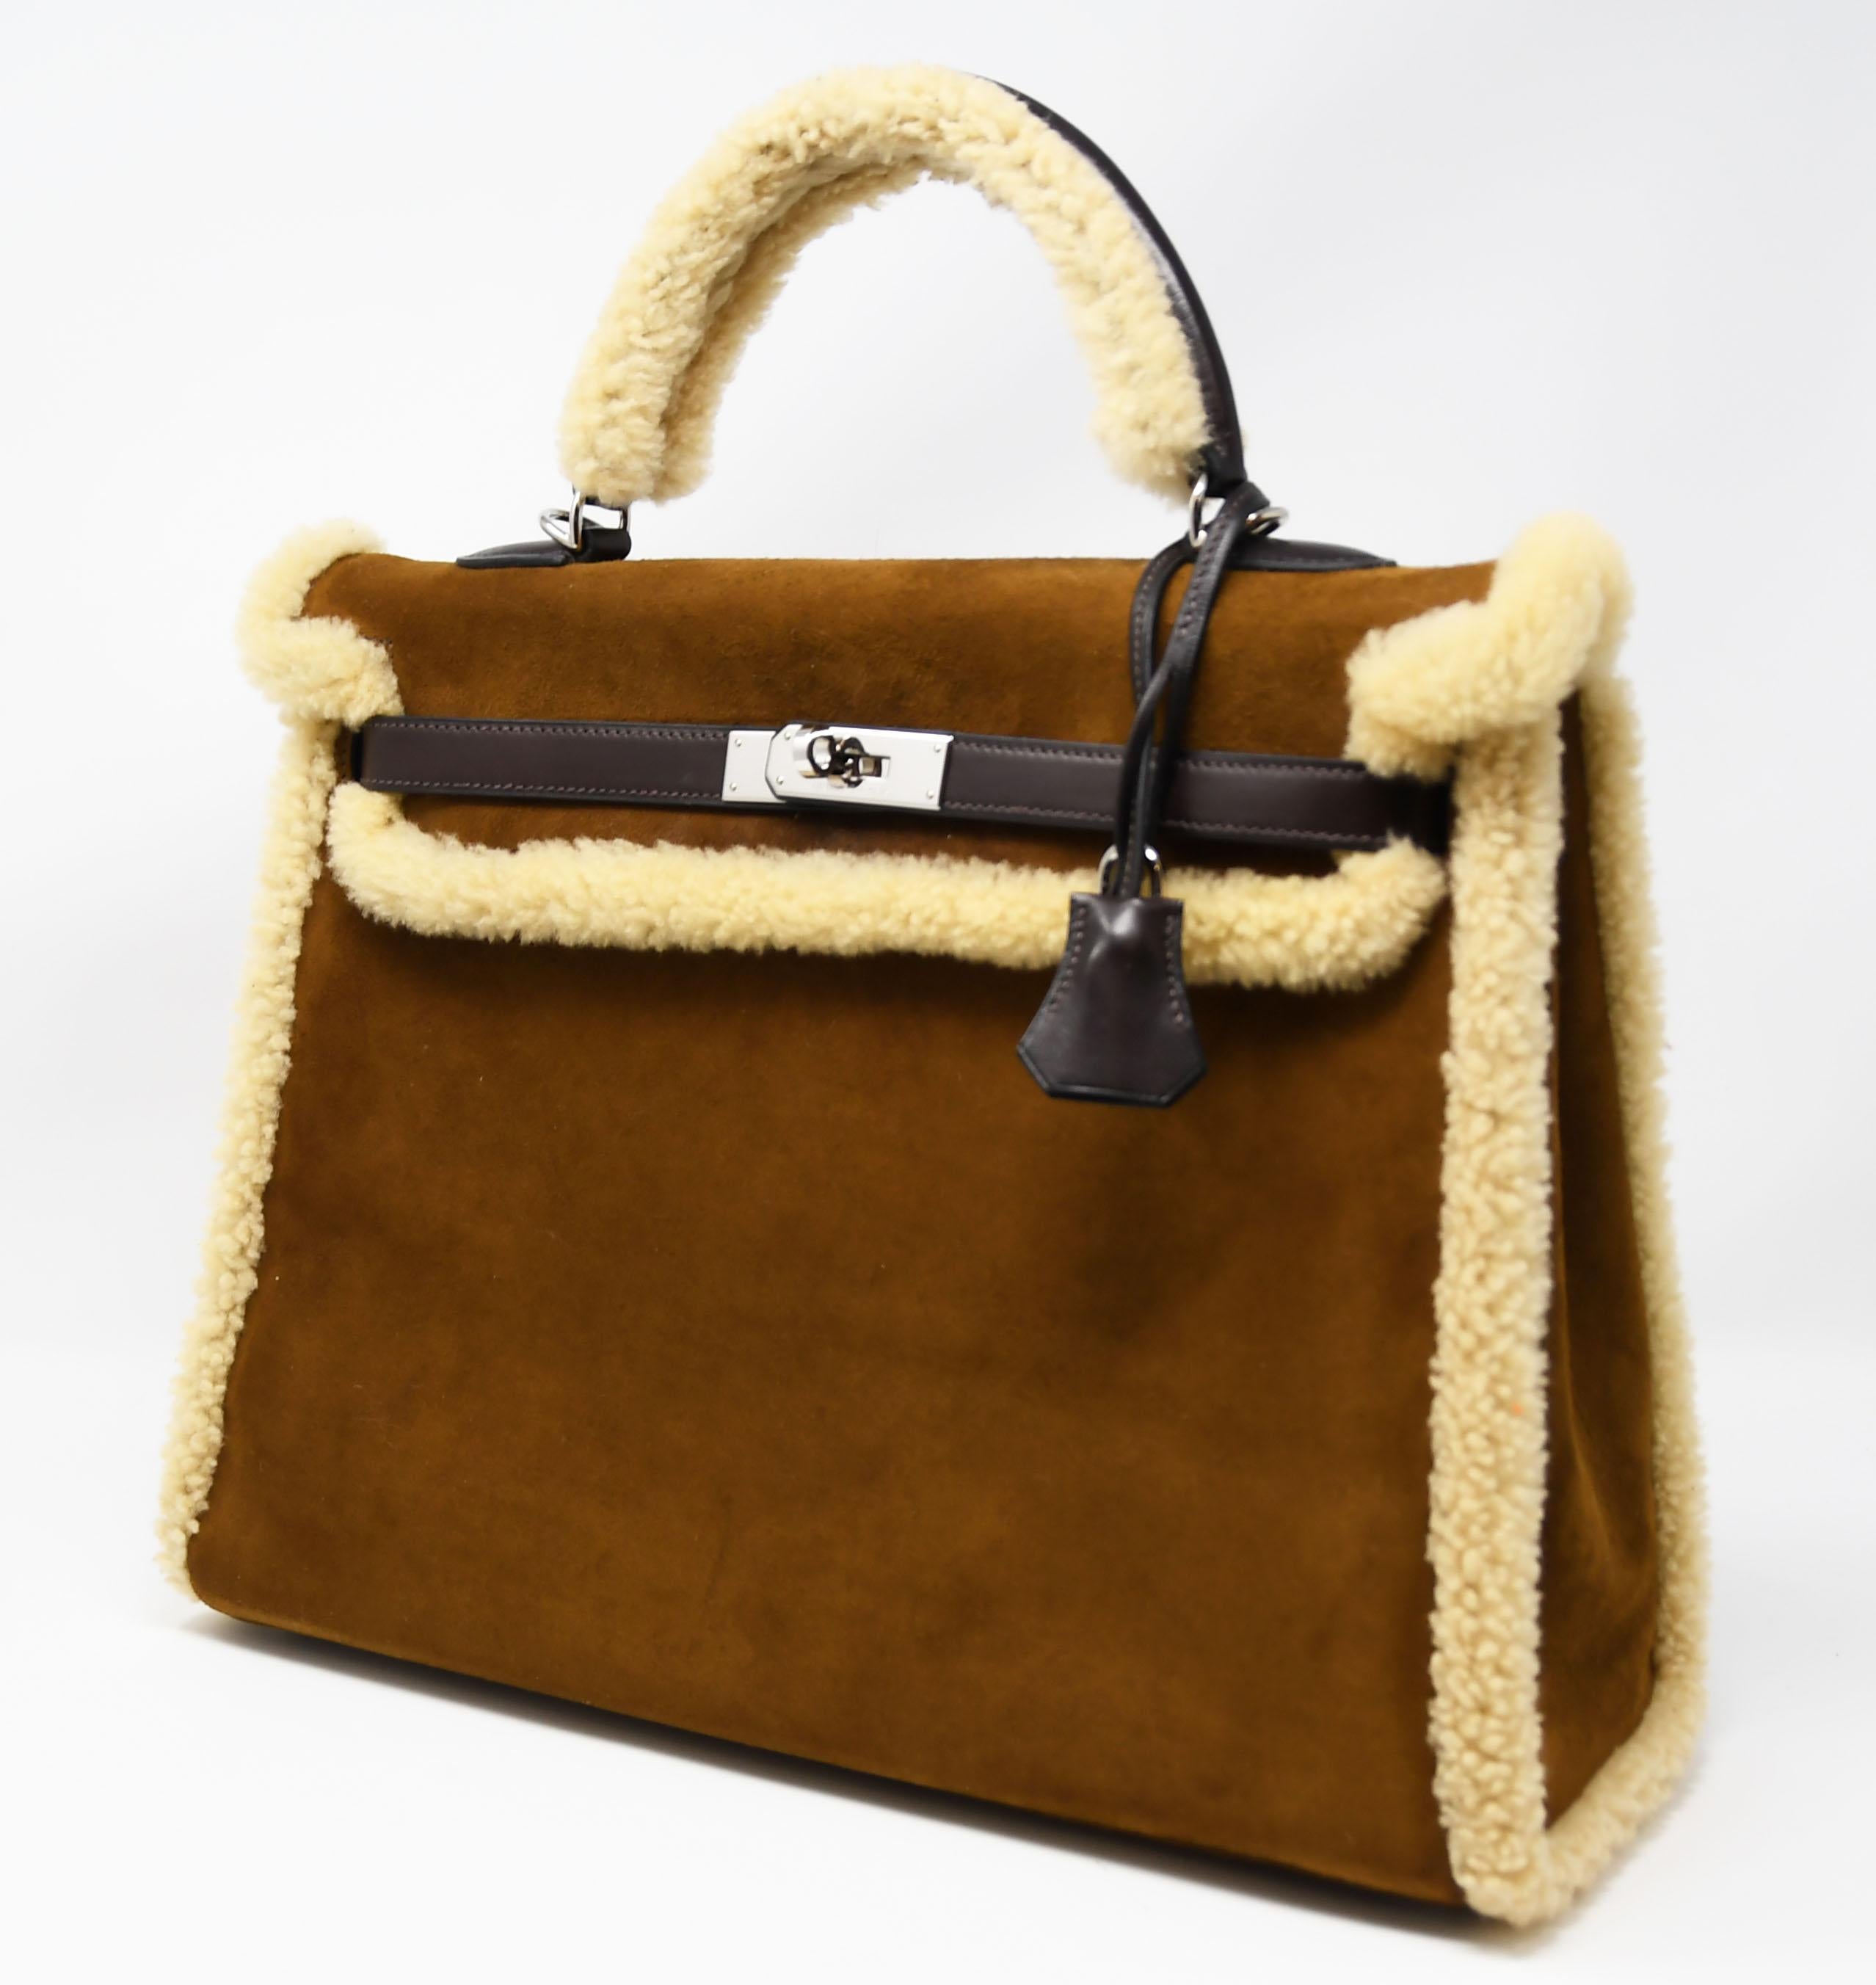 Hermes 35cm Kelly Sellier Teddy Shearling bag with ebene barenia, sheepskin woola & chevre leather. This iconic special order Hermes Kelly Sellier bag is timeless and chic. Fresh and crisp with palladium hardware.

    Condition: Excellent, Pre